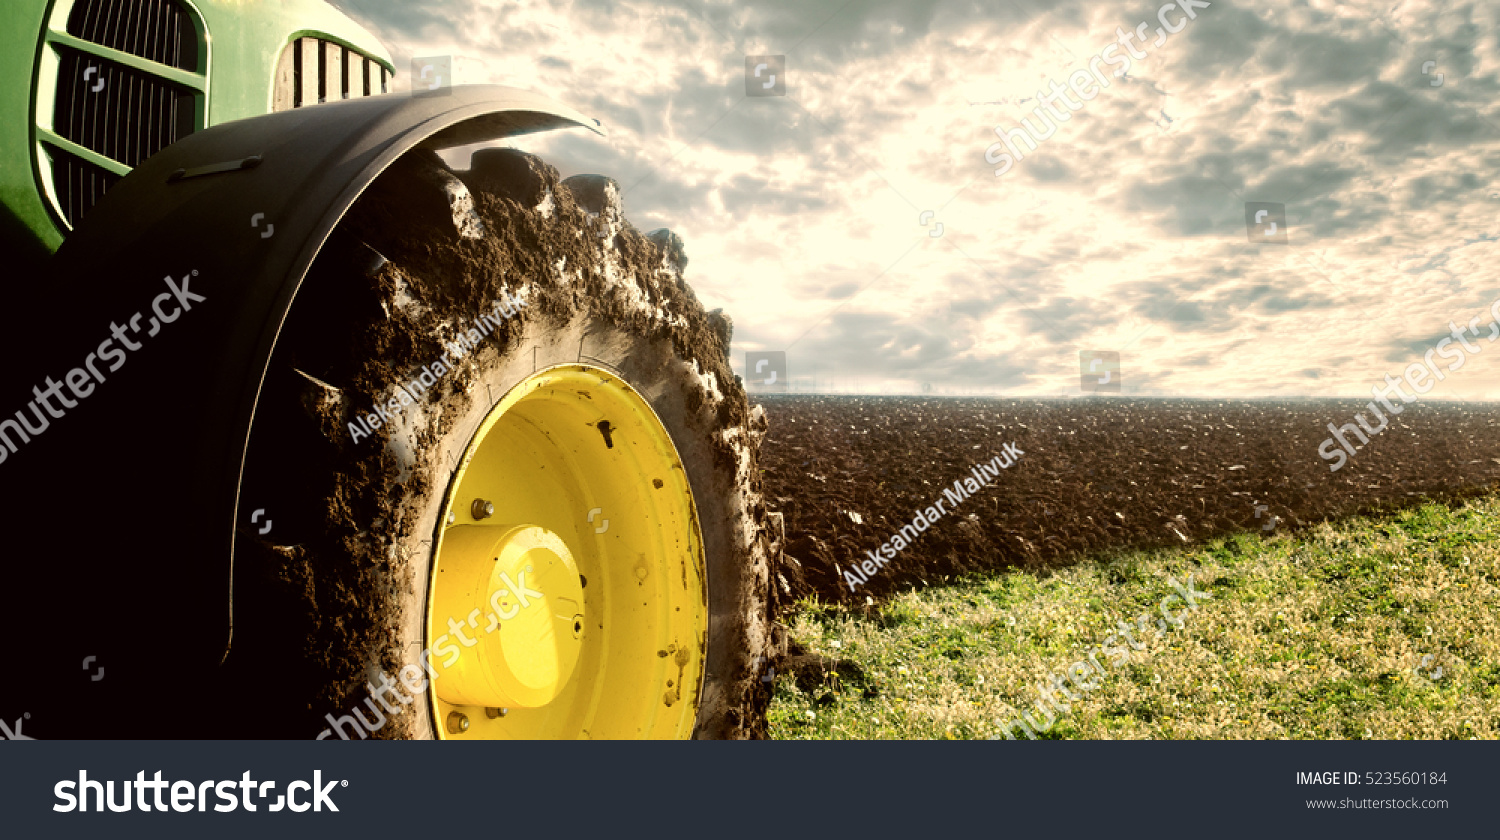 Agriculture. Tractor plowing field. Wheels covered in mud, field in the backround. Cultivated field. Agronomy, farming, husbandry concept. #523560184